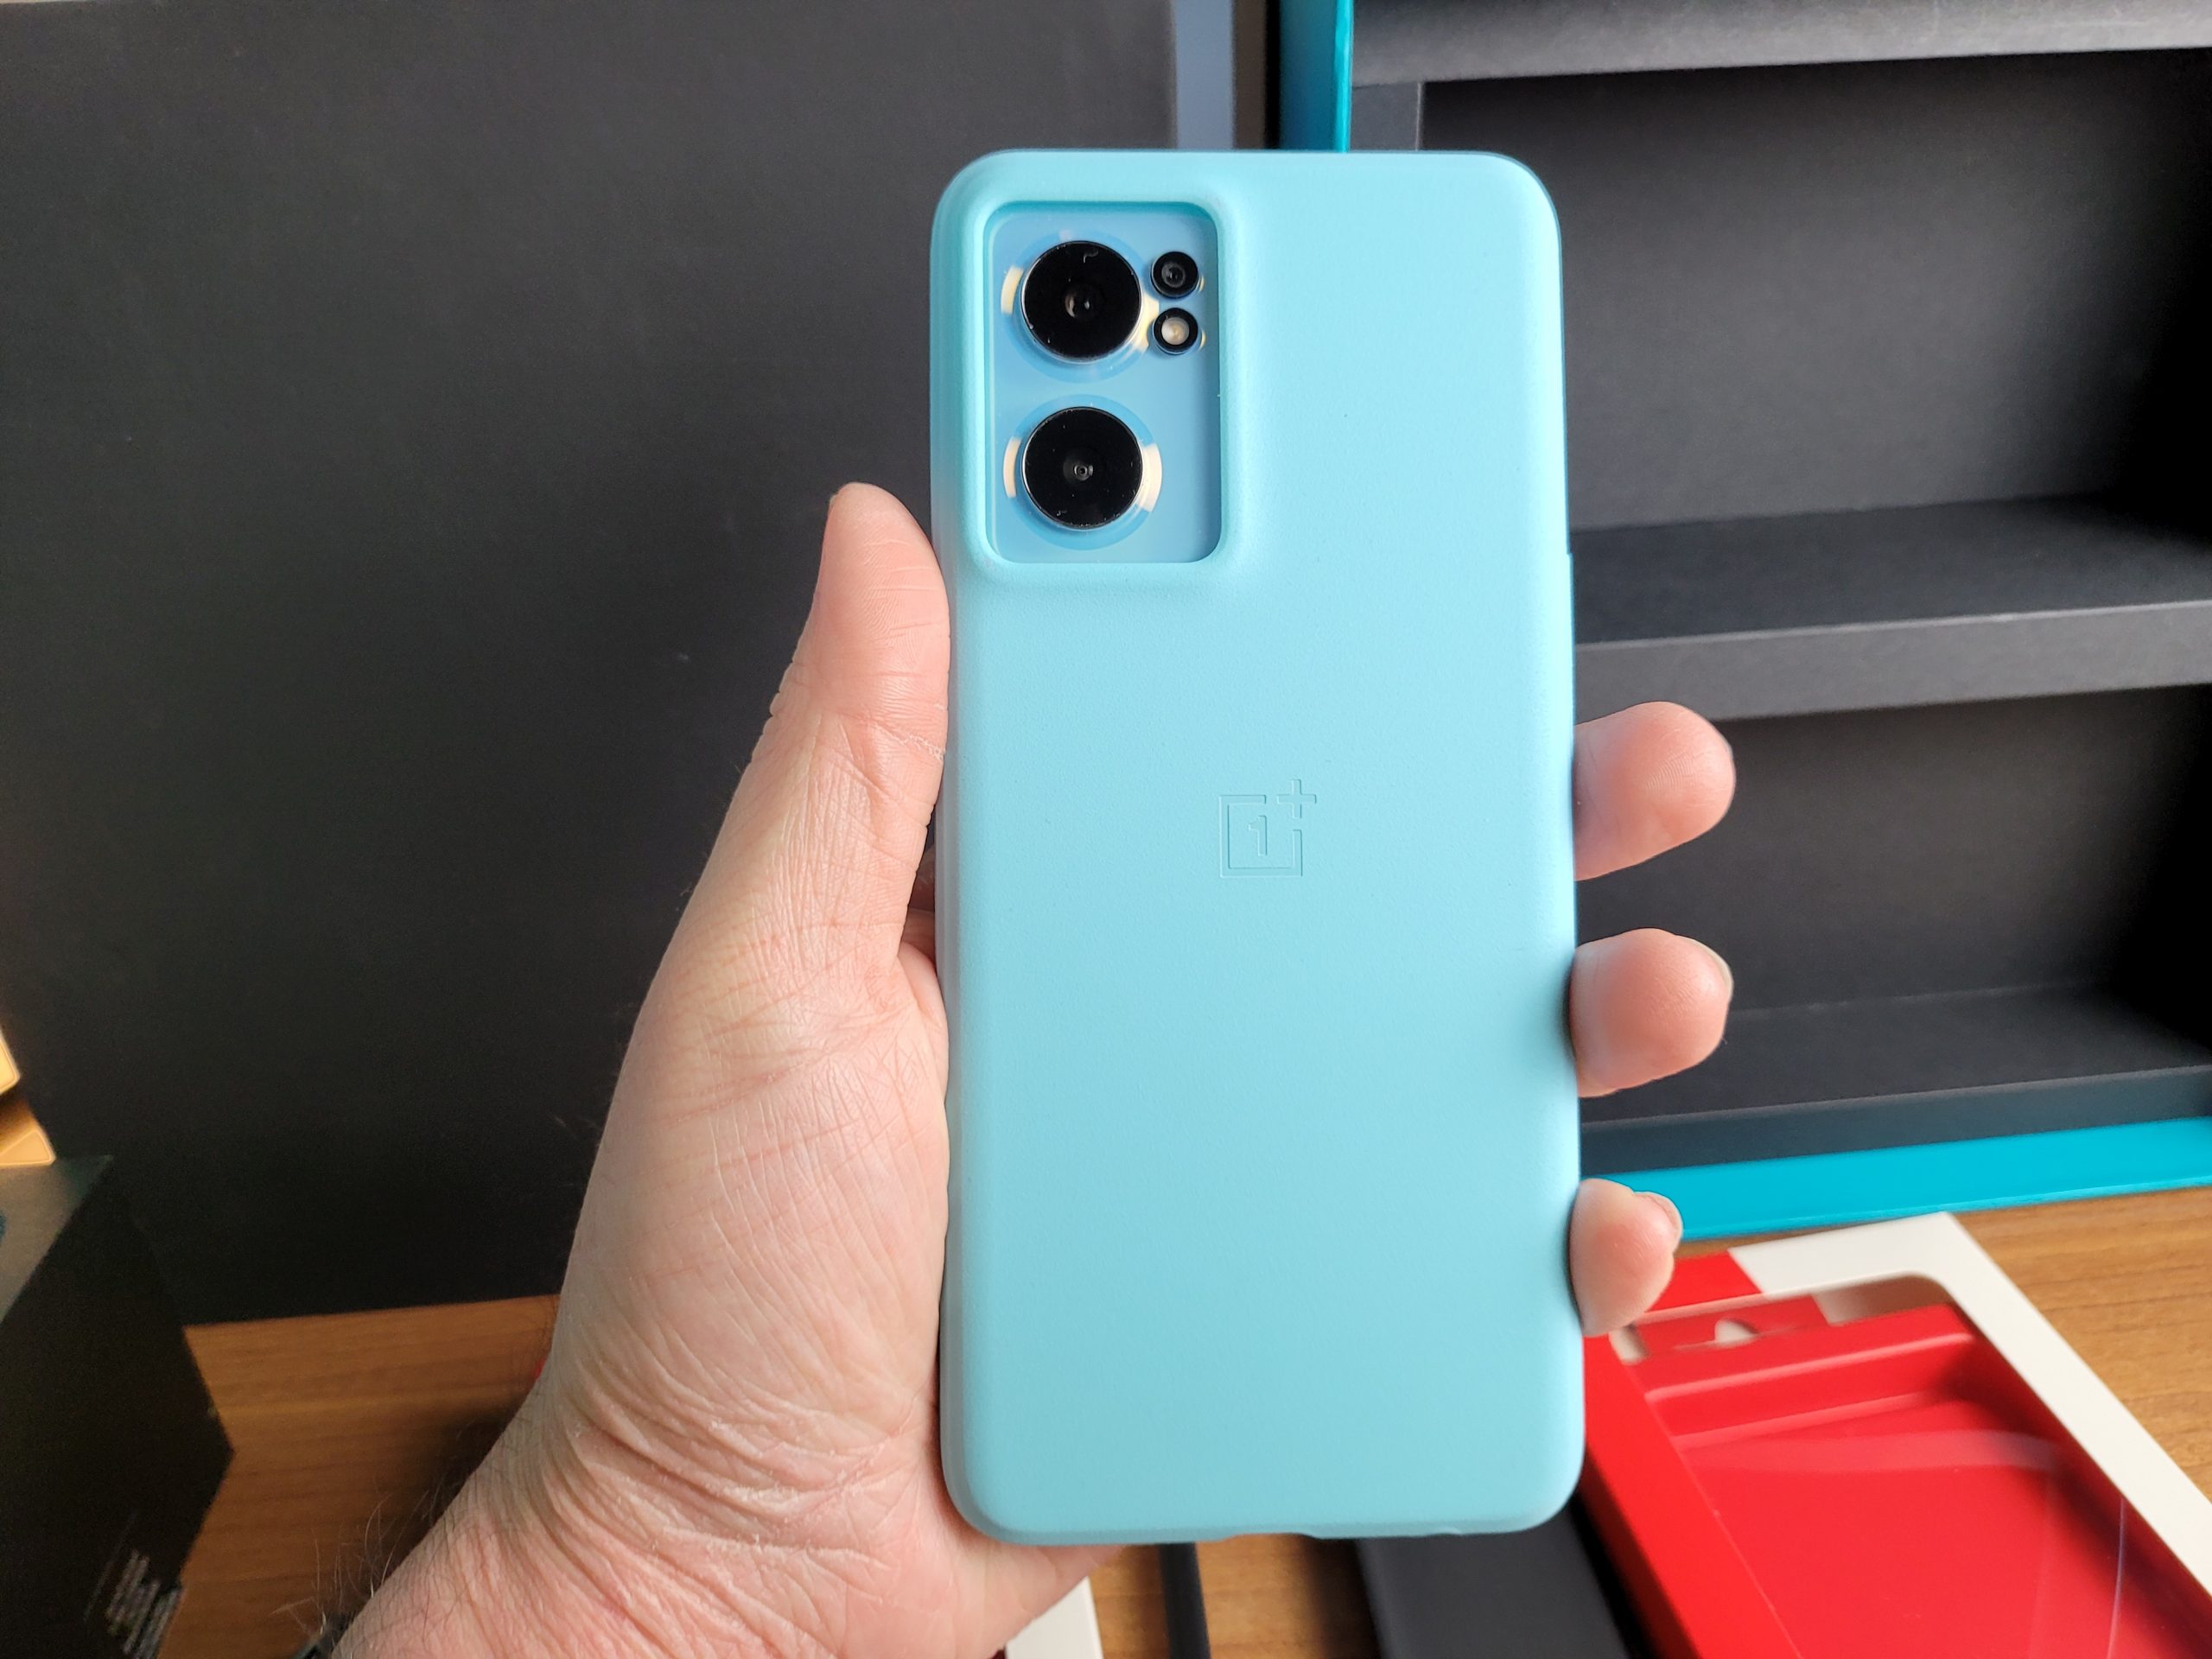 20220513 224811 scaled - OnePlus Nord CE 2 5G recensione